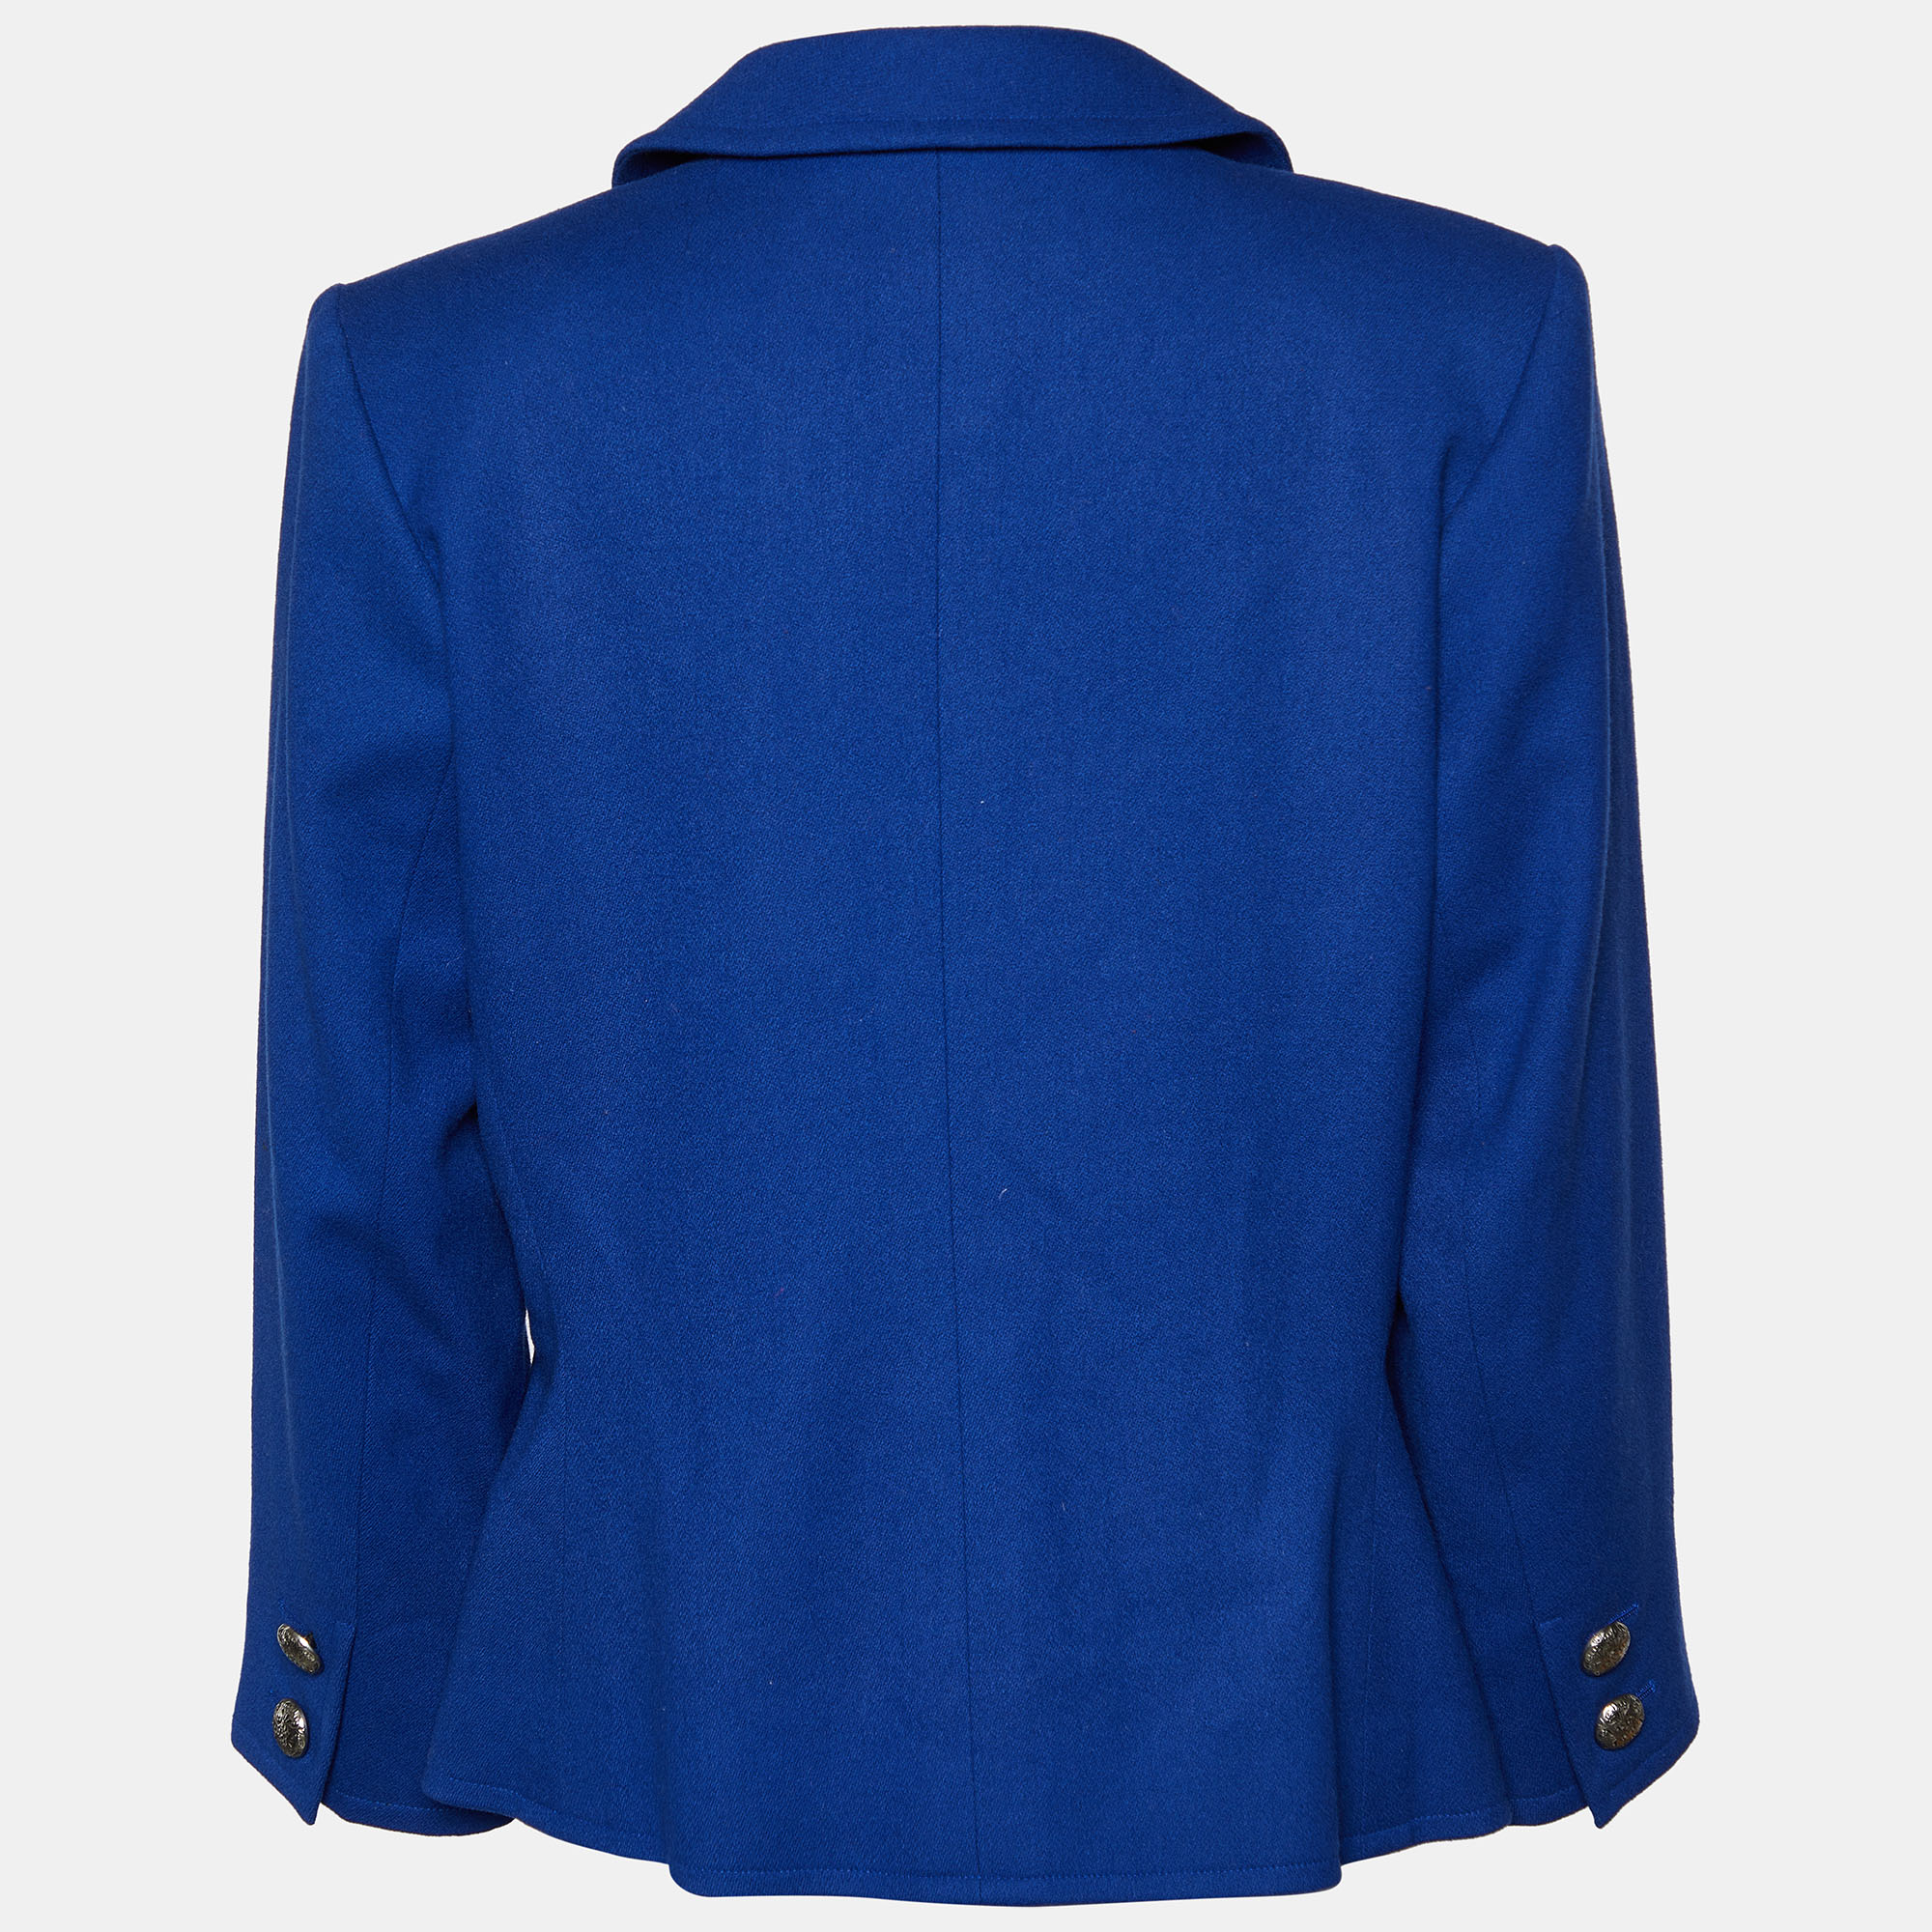 

Yves Saint Laurent Rive Gauche Blue Wool Double Breasted Jacket